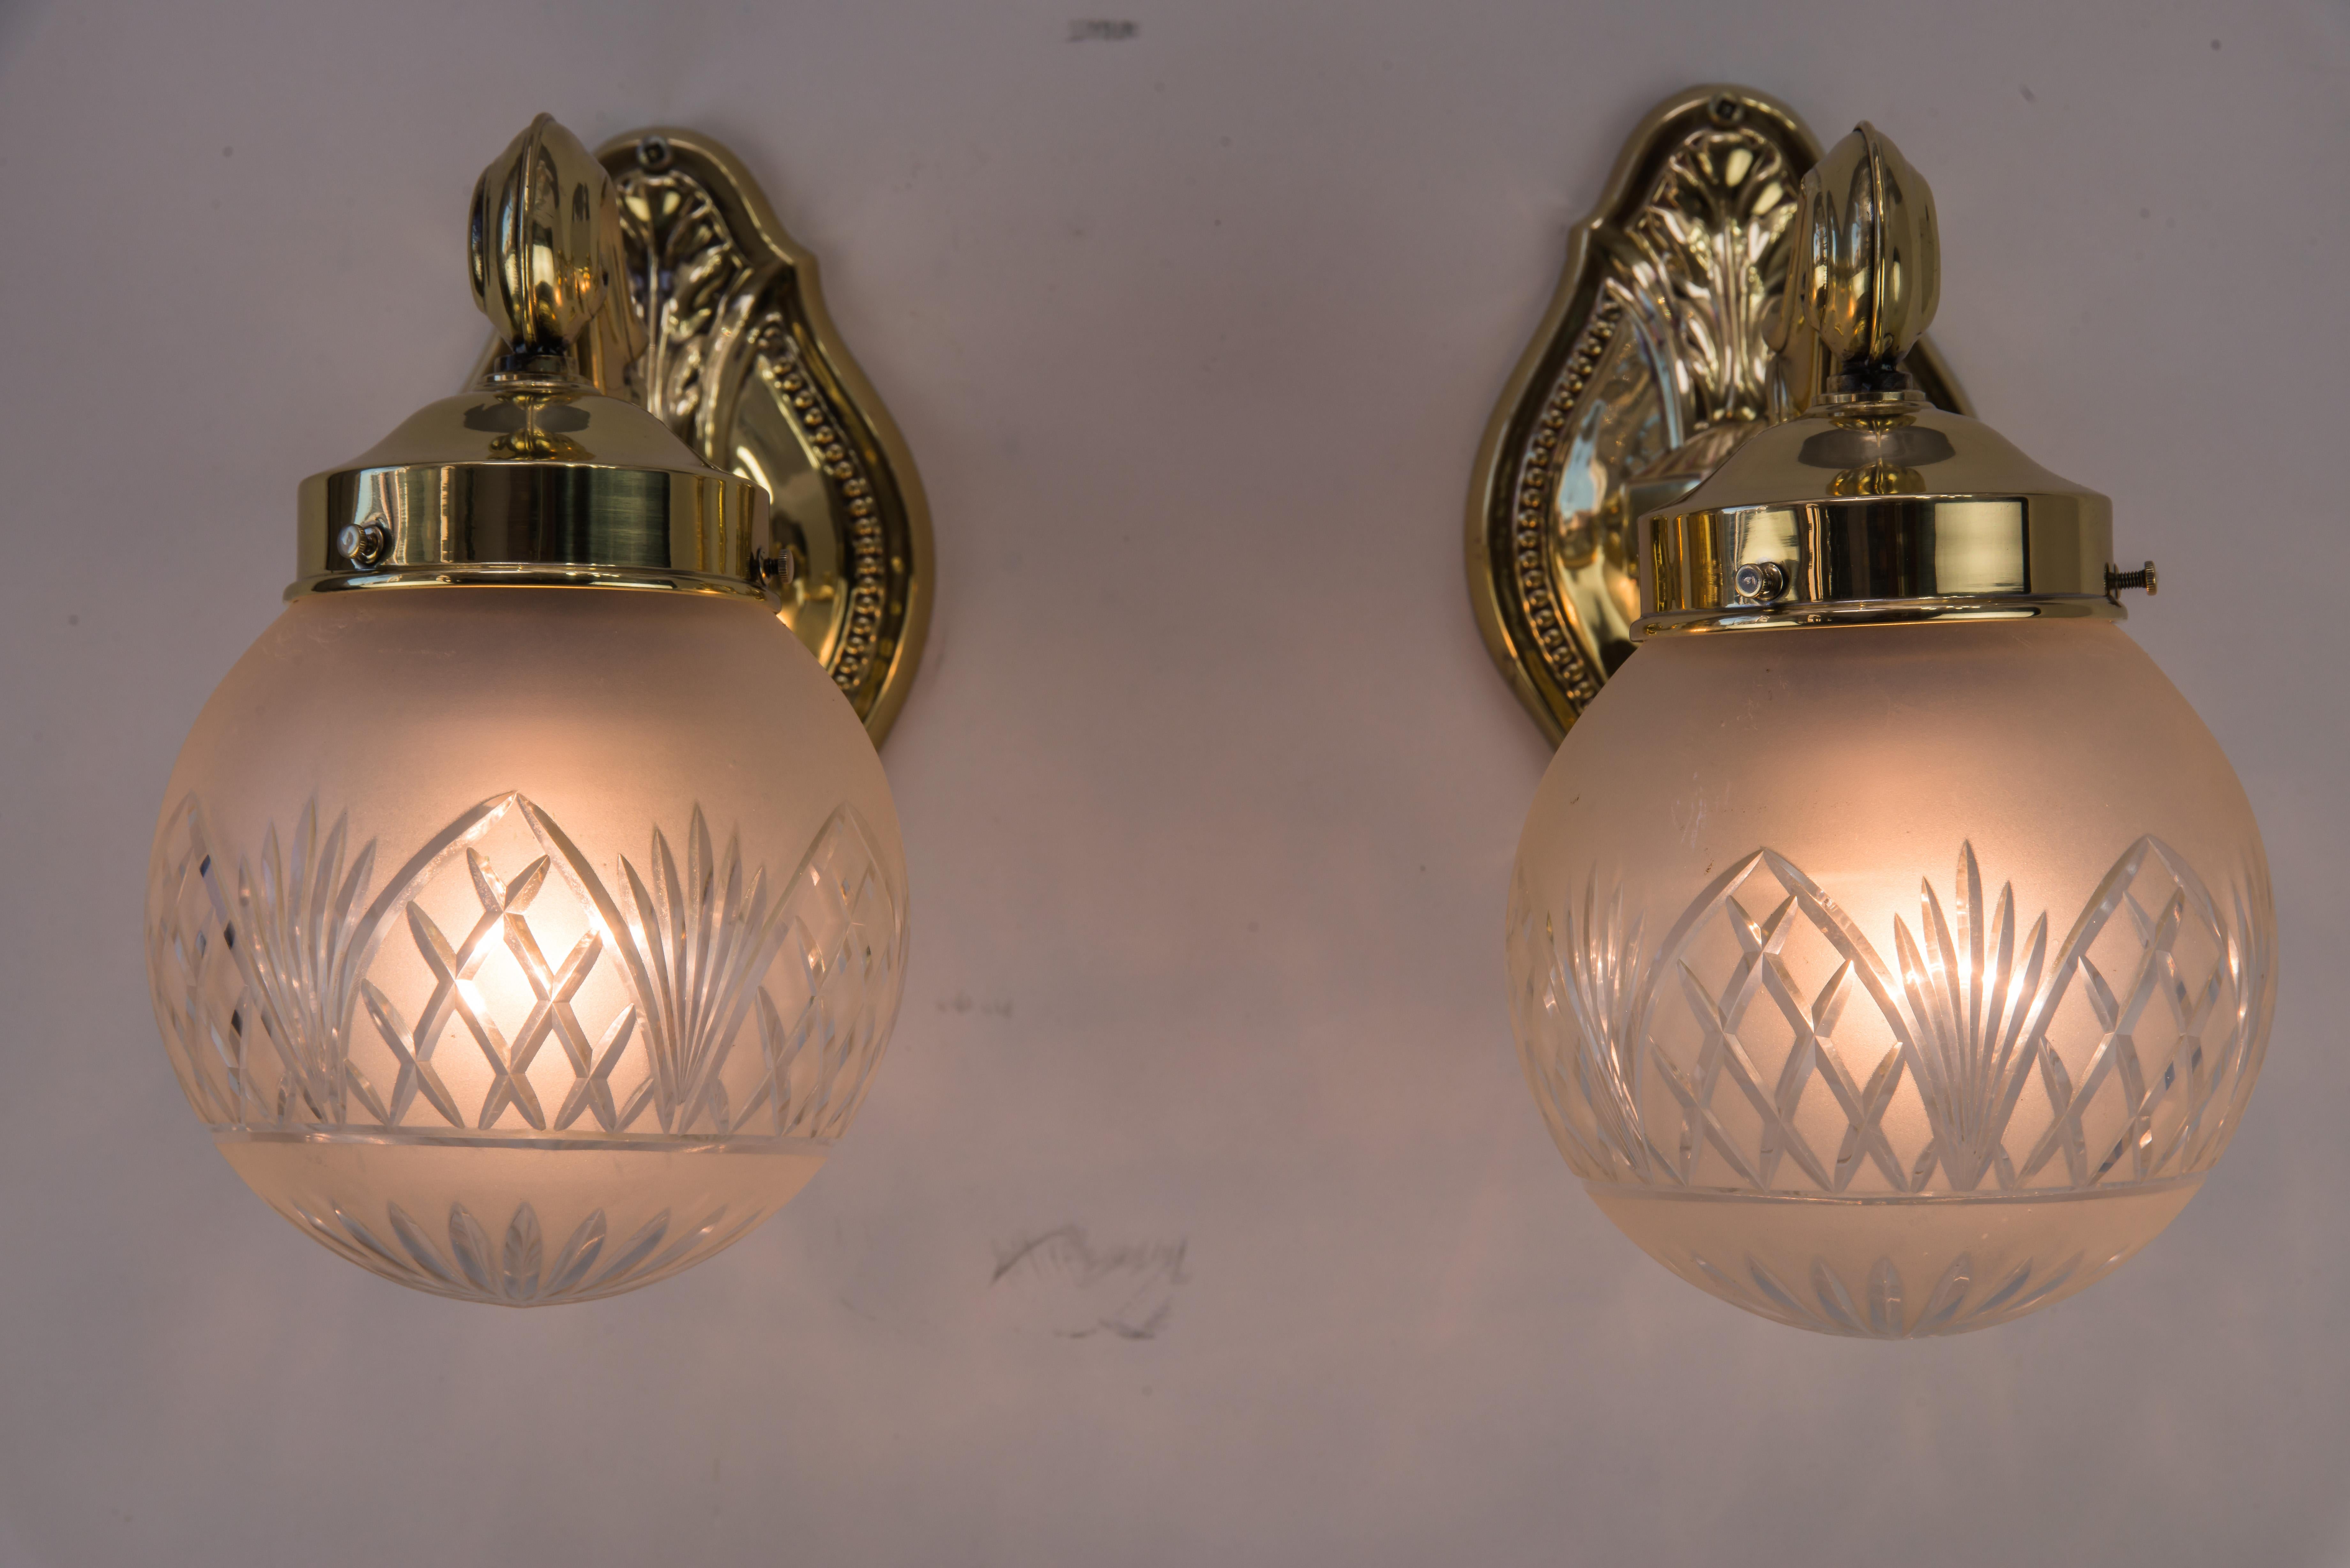 Polished Two Historistic Wall sconces around 1890s with original cut glass shades